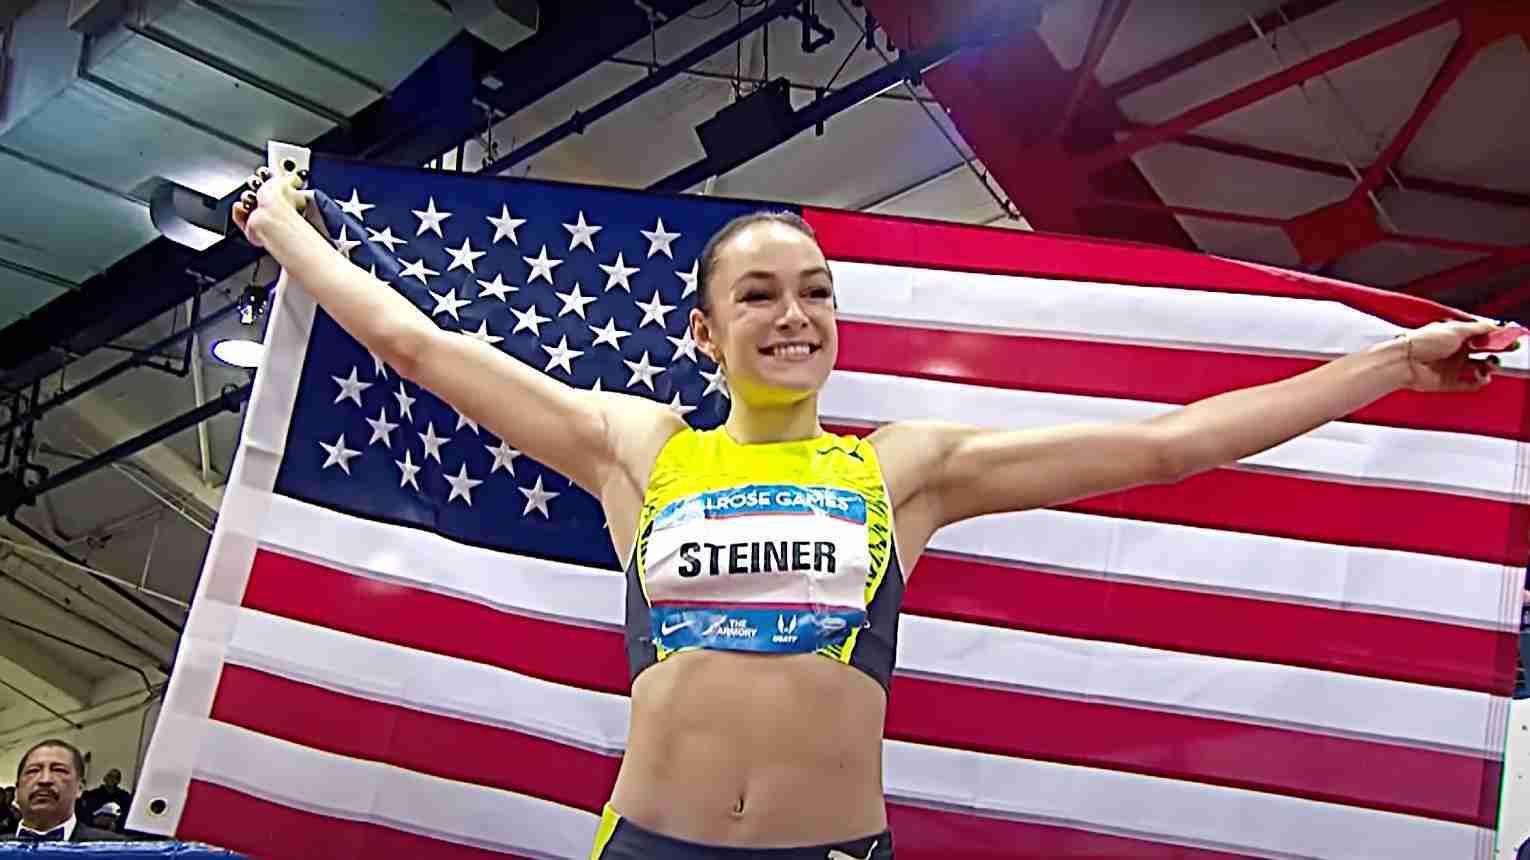 Abby Steiner after breaking USA 300m national record with 35.54